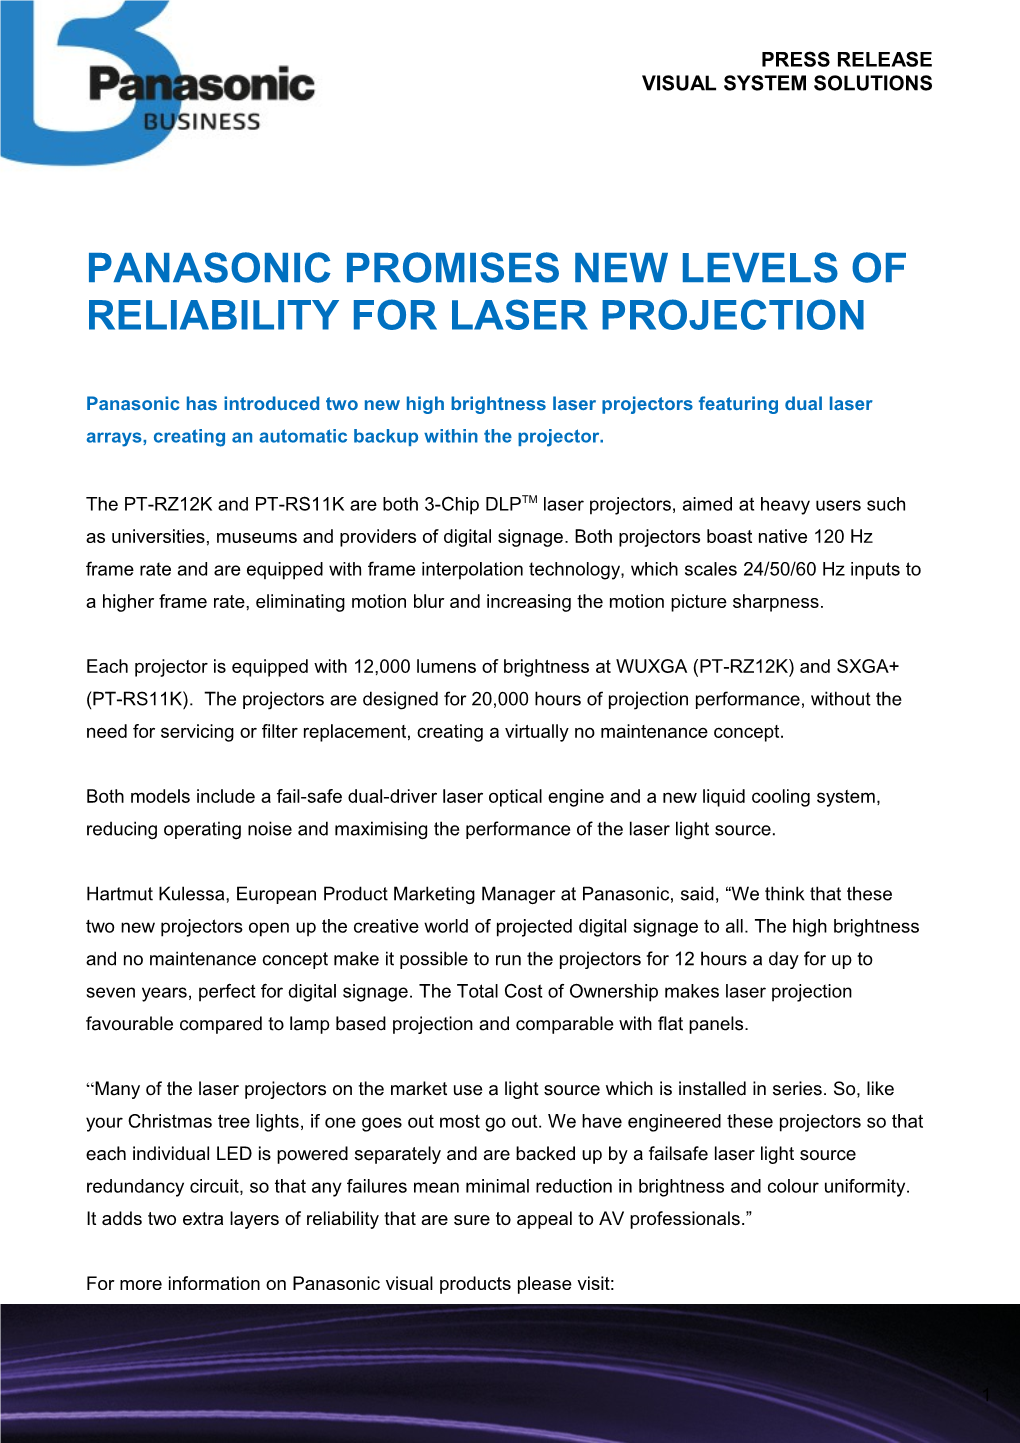 Panasonic Promises New Levels of Reliability for Laser Projection